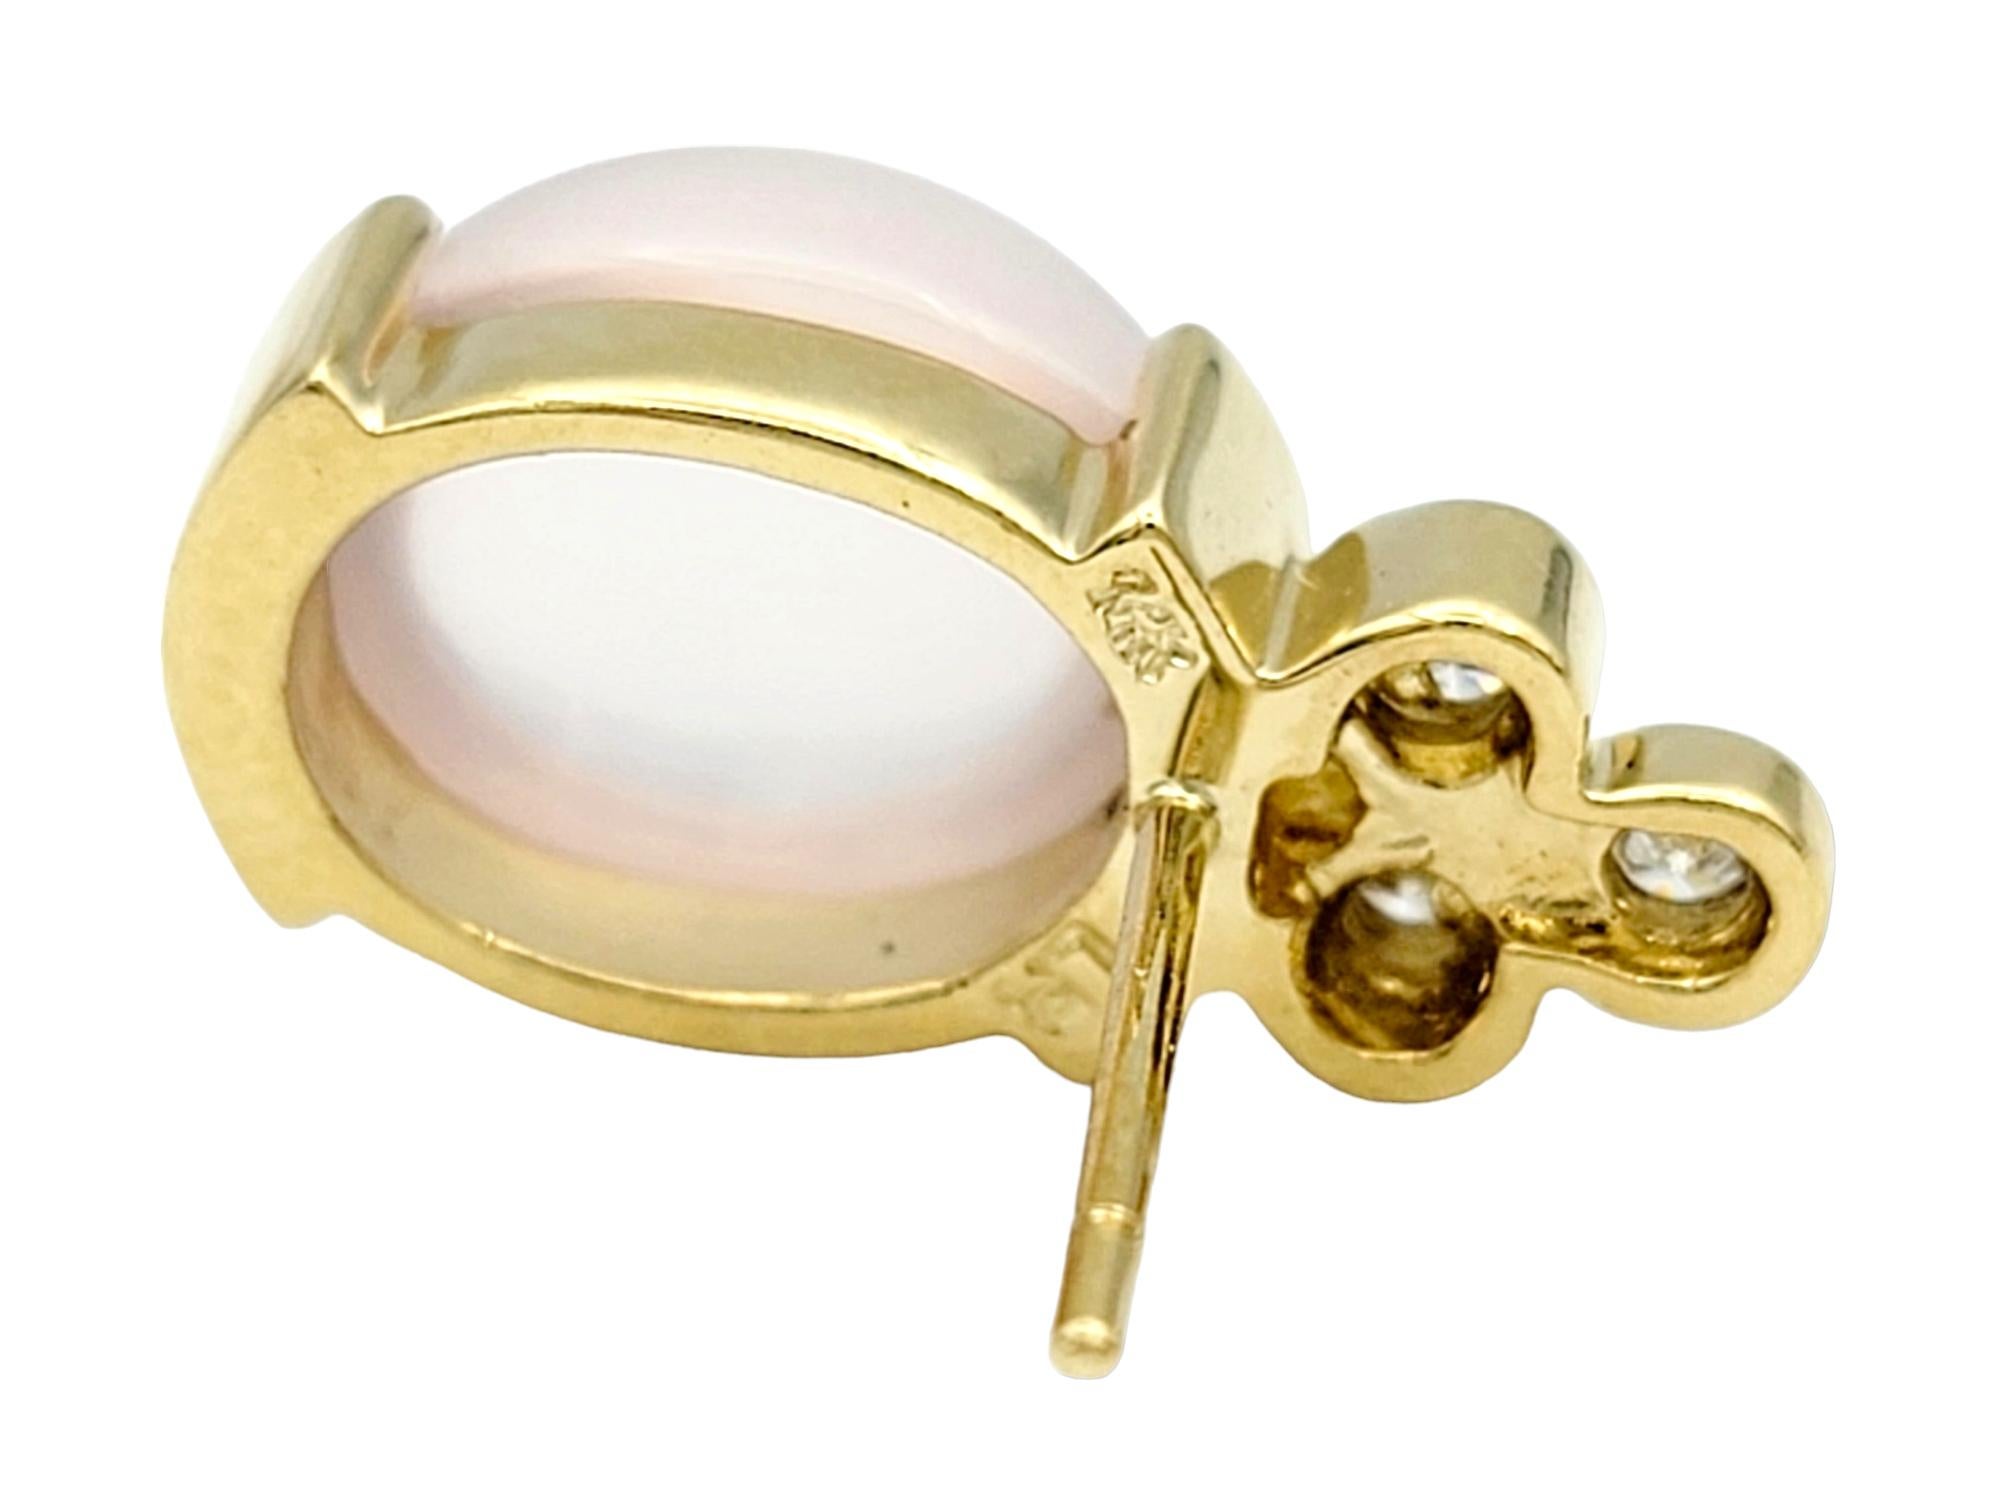 Cabochon Rose Quartz and Round Diamond Stud Earrings Set in 14 Karat Yellow Gold In Good Condition For Sale In Scottsdale, AZ